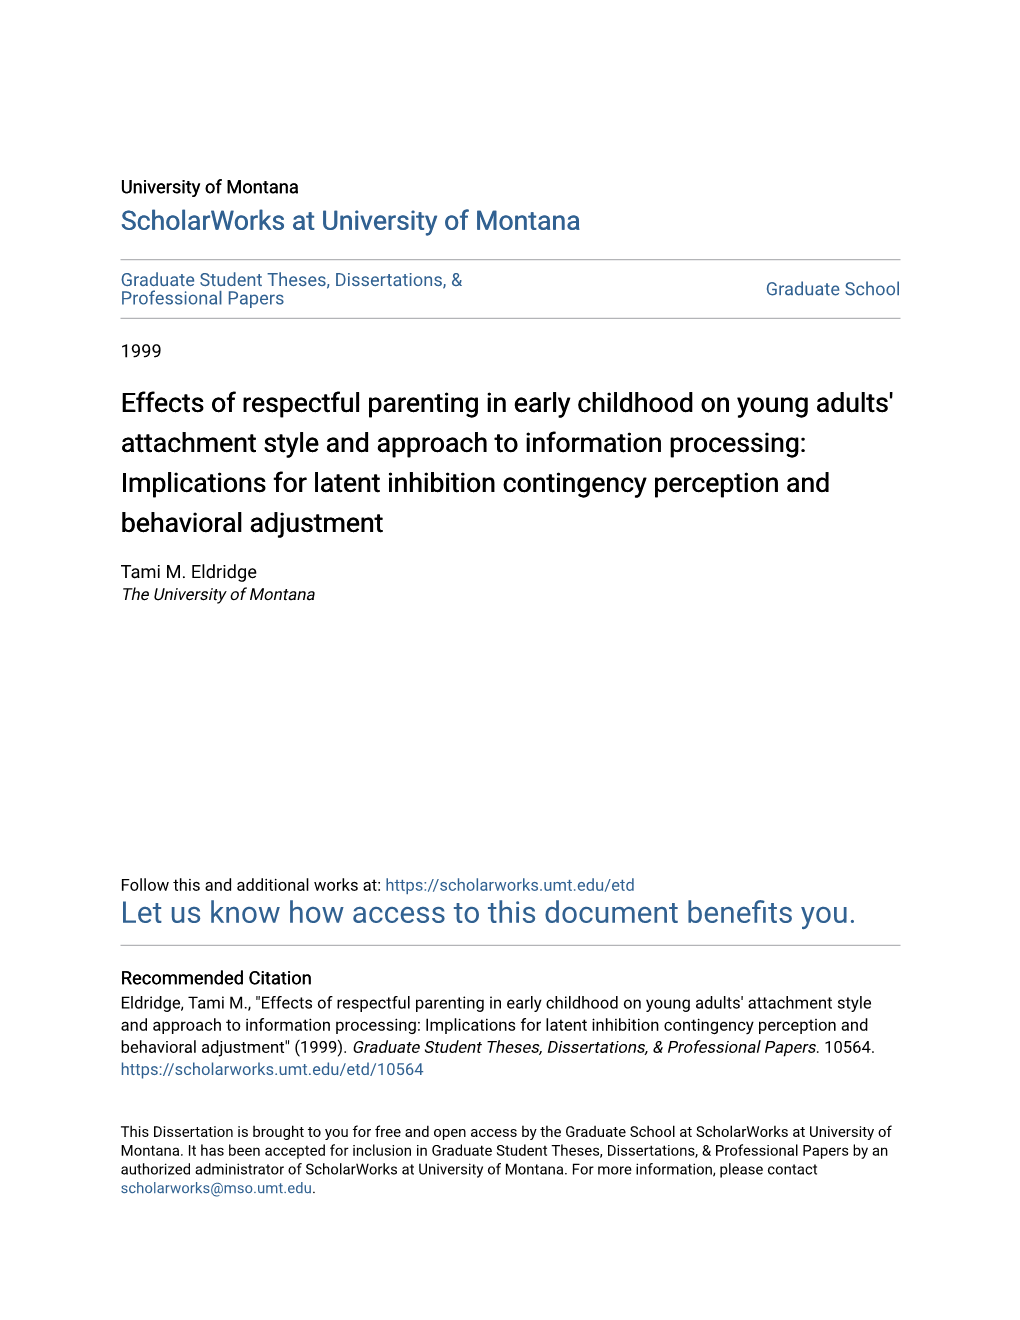 Effects of Respectful Parenting in Early Childhood on Young Adults' Attachment Style and Approach to Information Processing